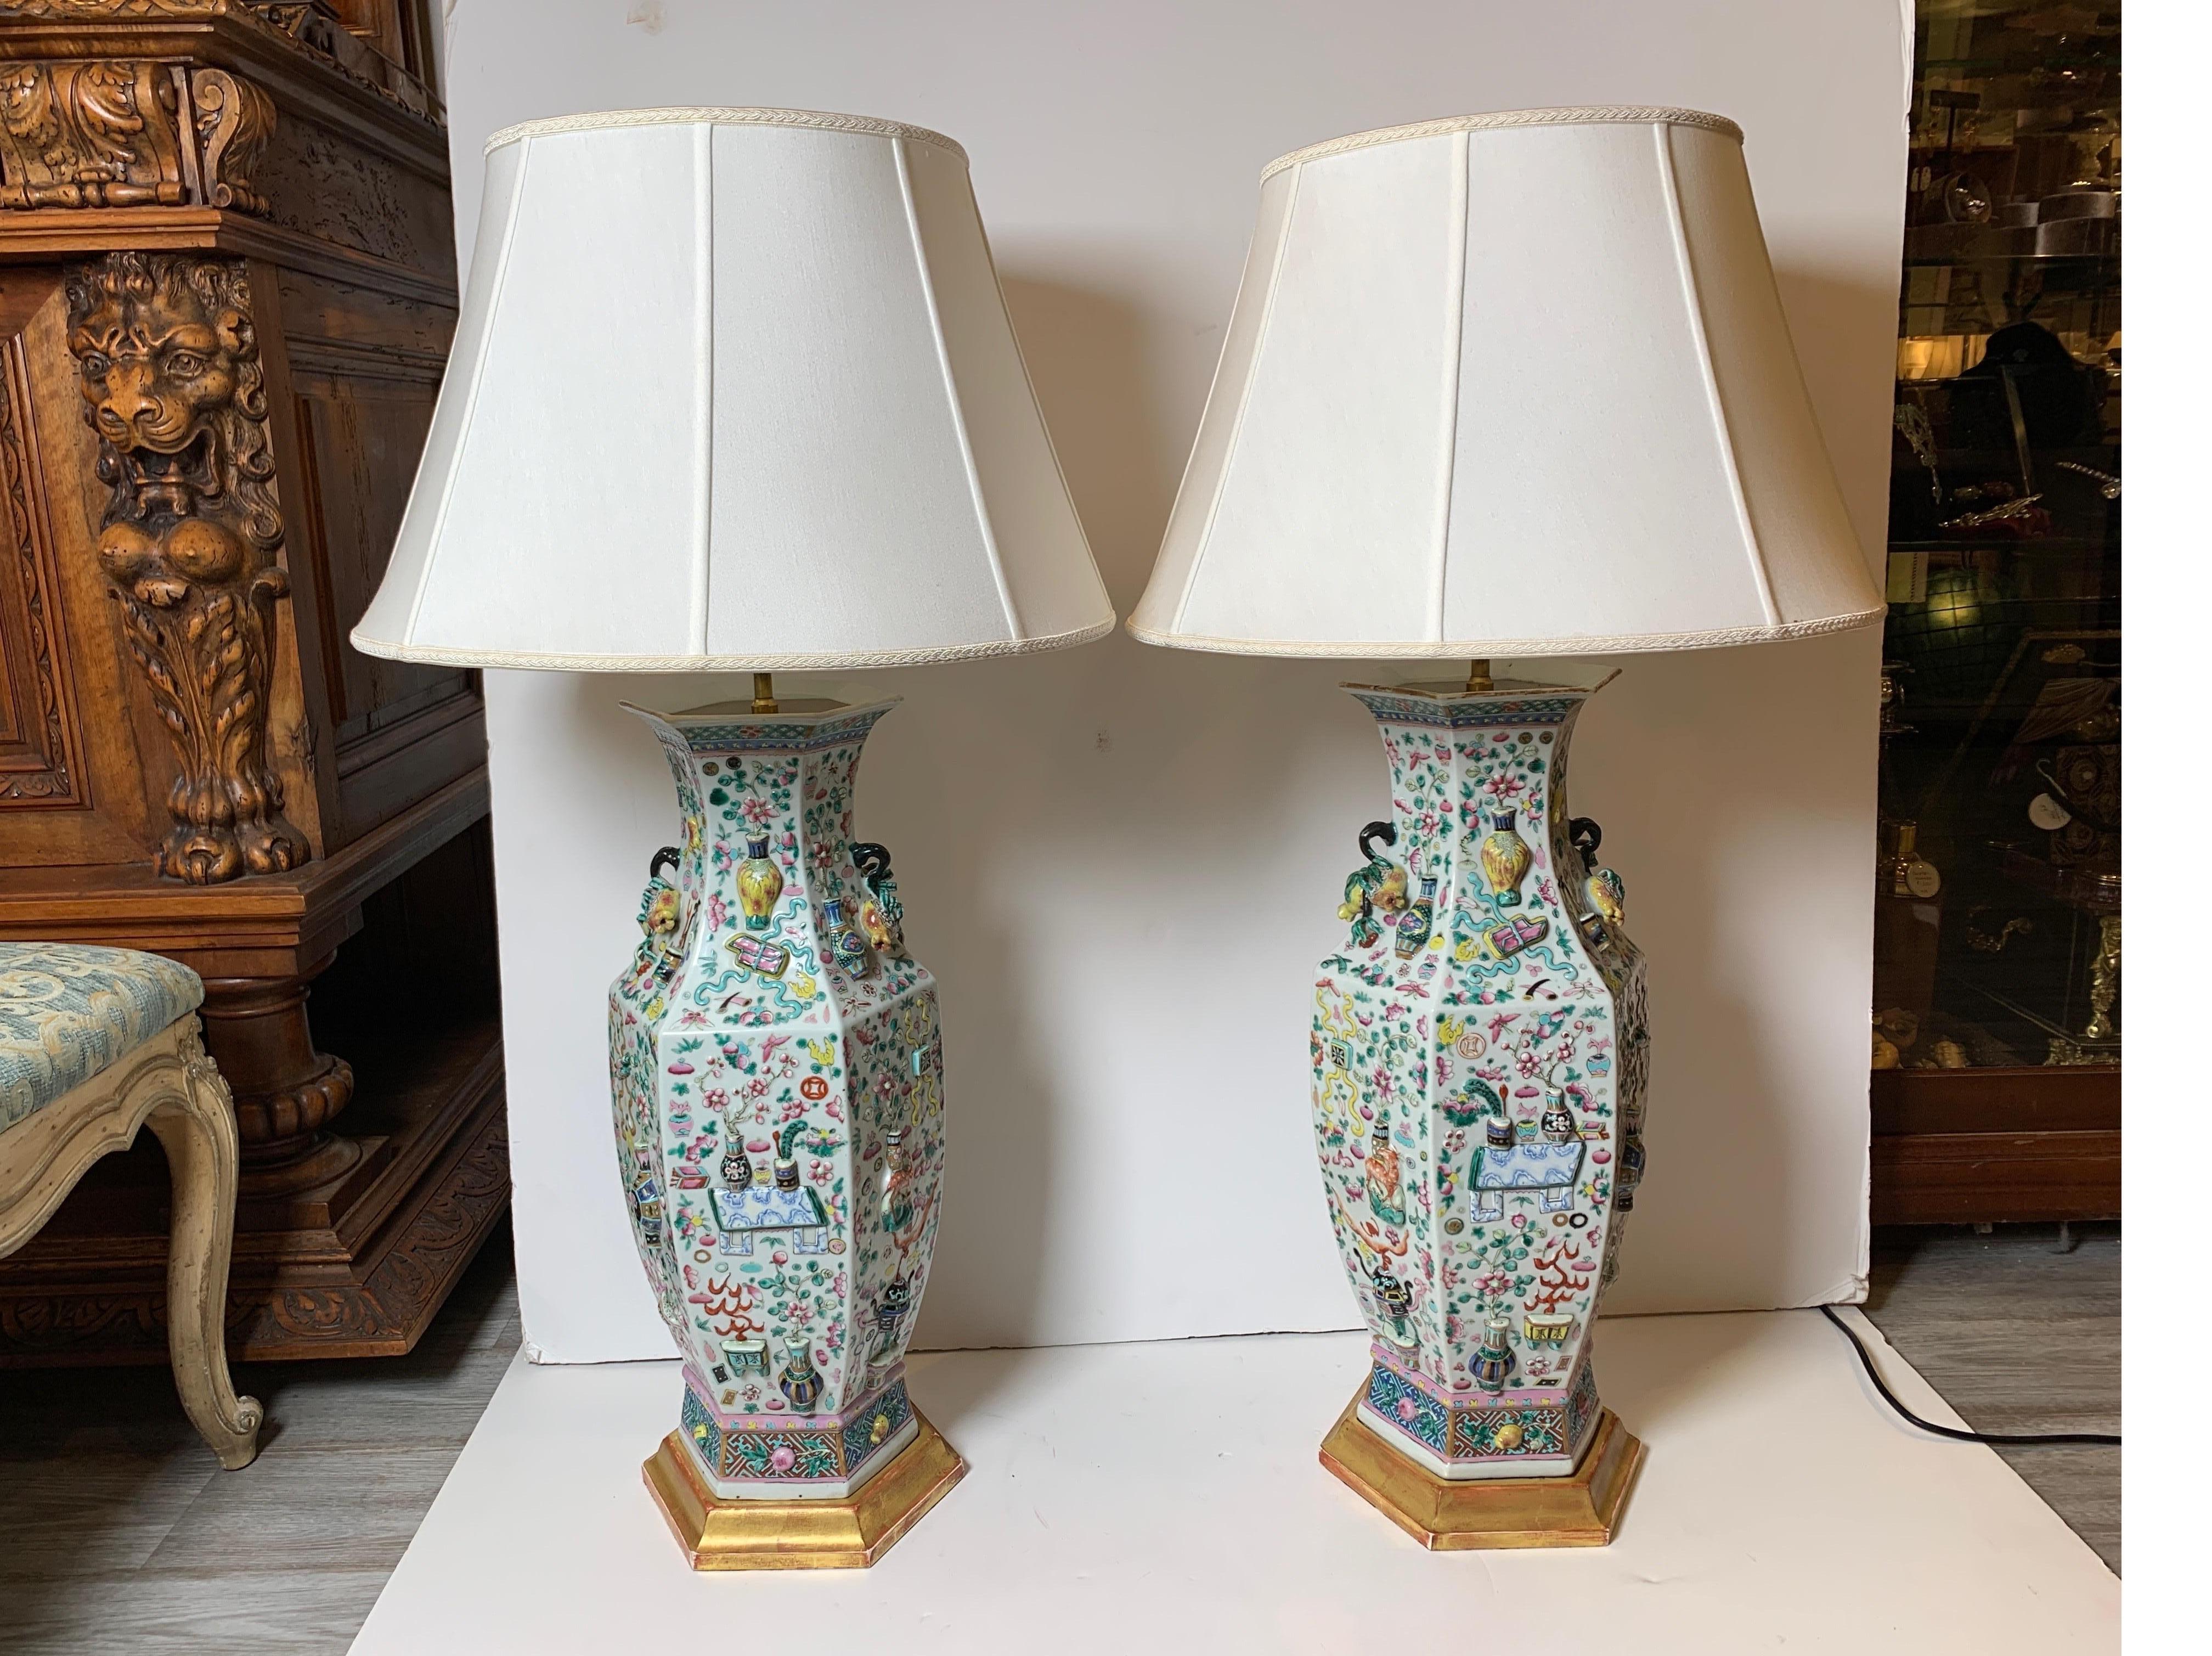 Best quality high relief hand painted Chinese export porcelain lamps. The vases from the early 19th century, now as lamps with giltwood bases. The center pole is adjustable to accommodate different size shades, with two electric sockets. The shades